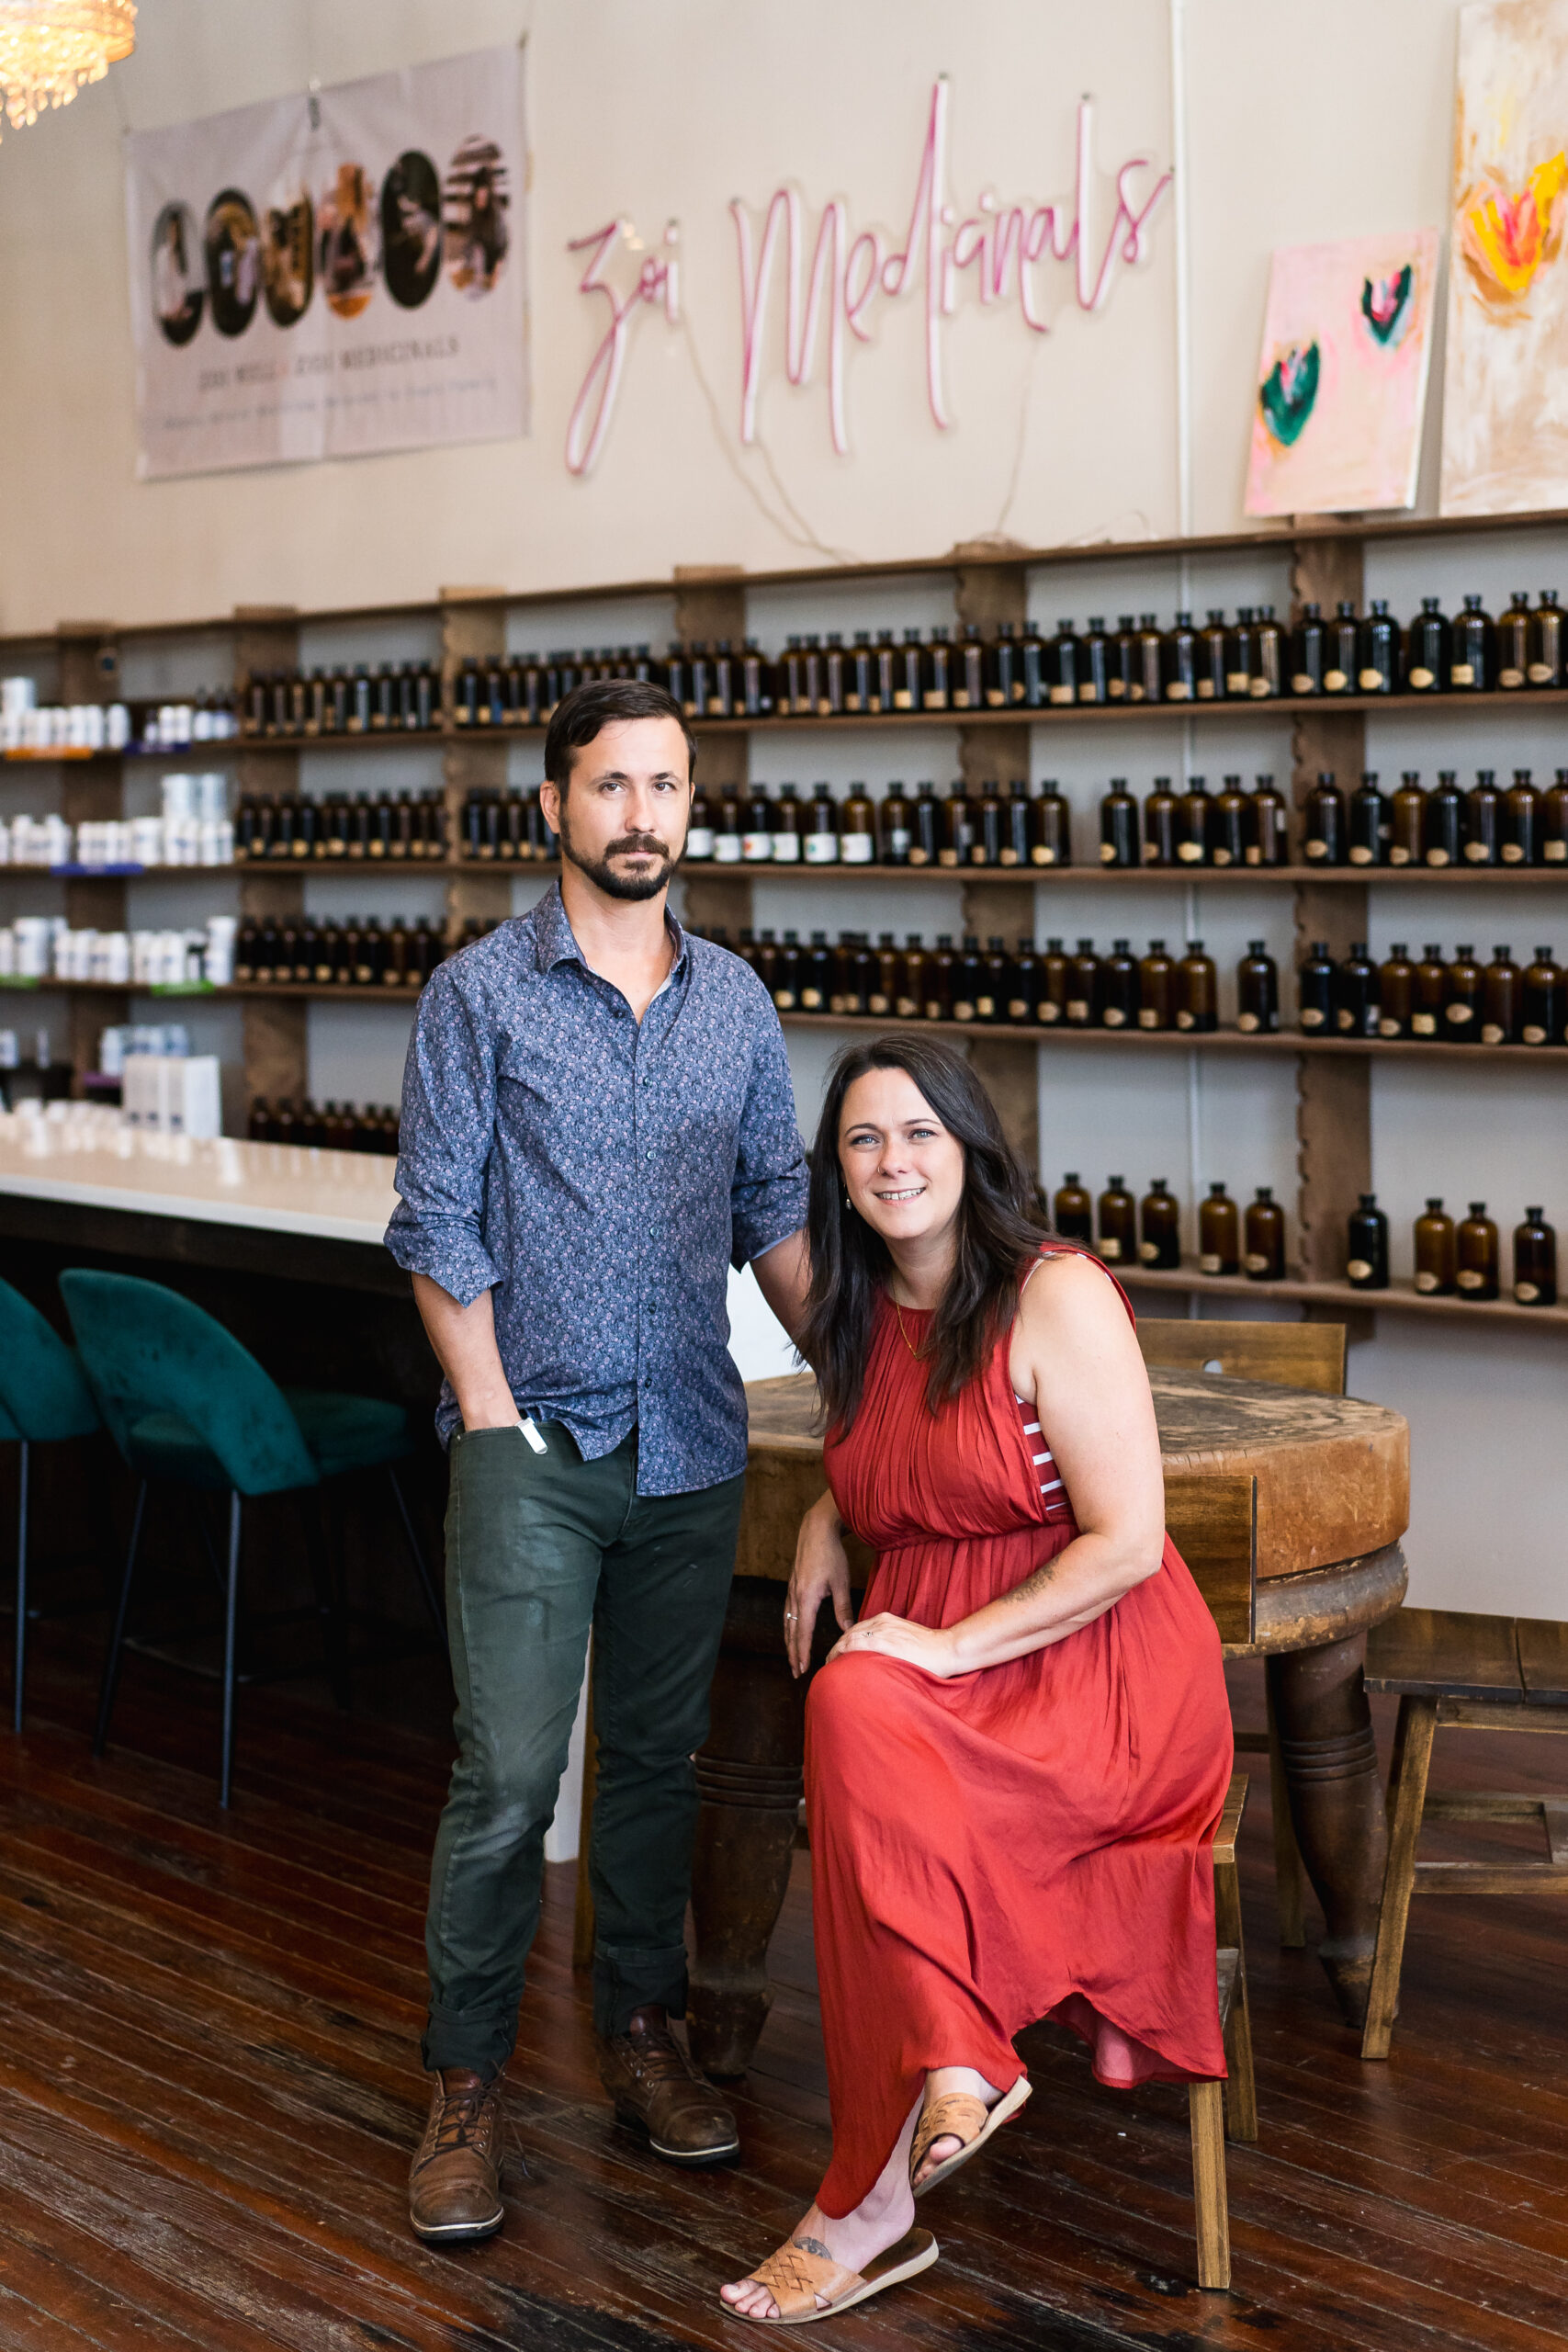 a man and a woman sitting in front of a display of natural medicine bottles